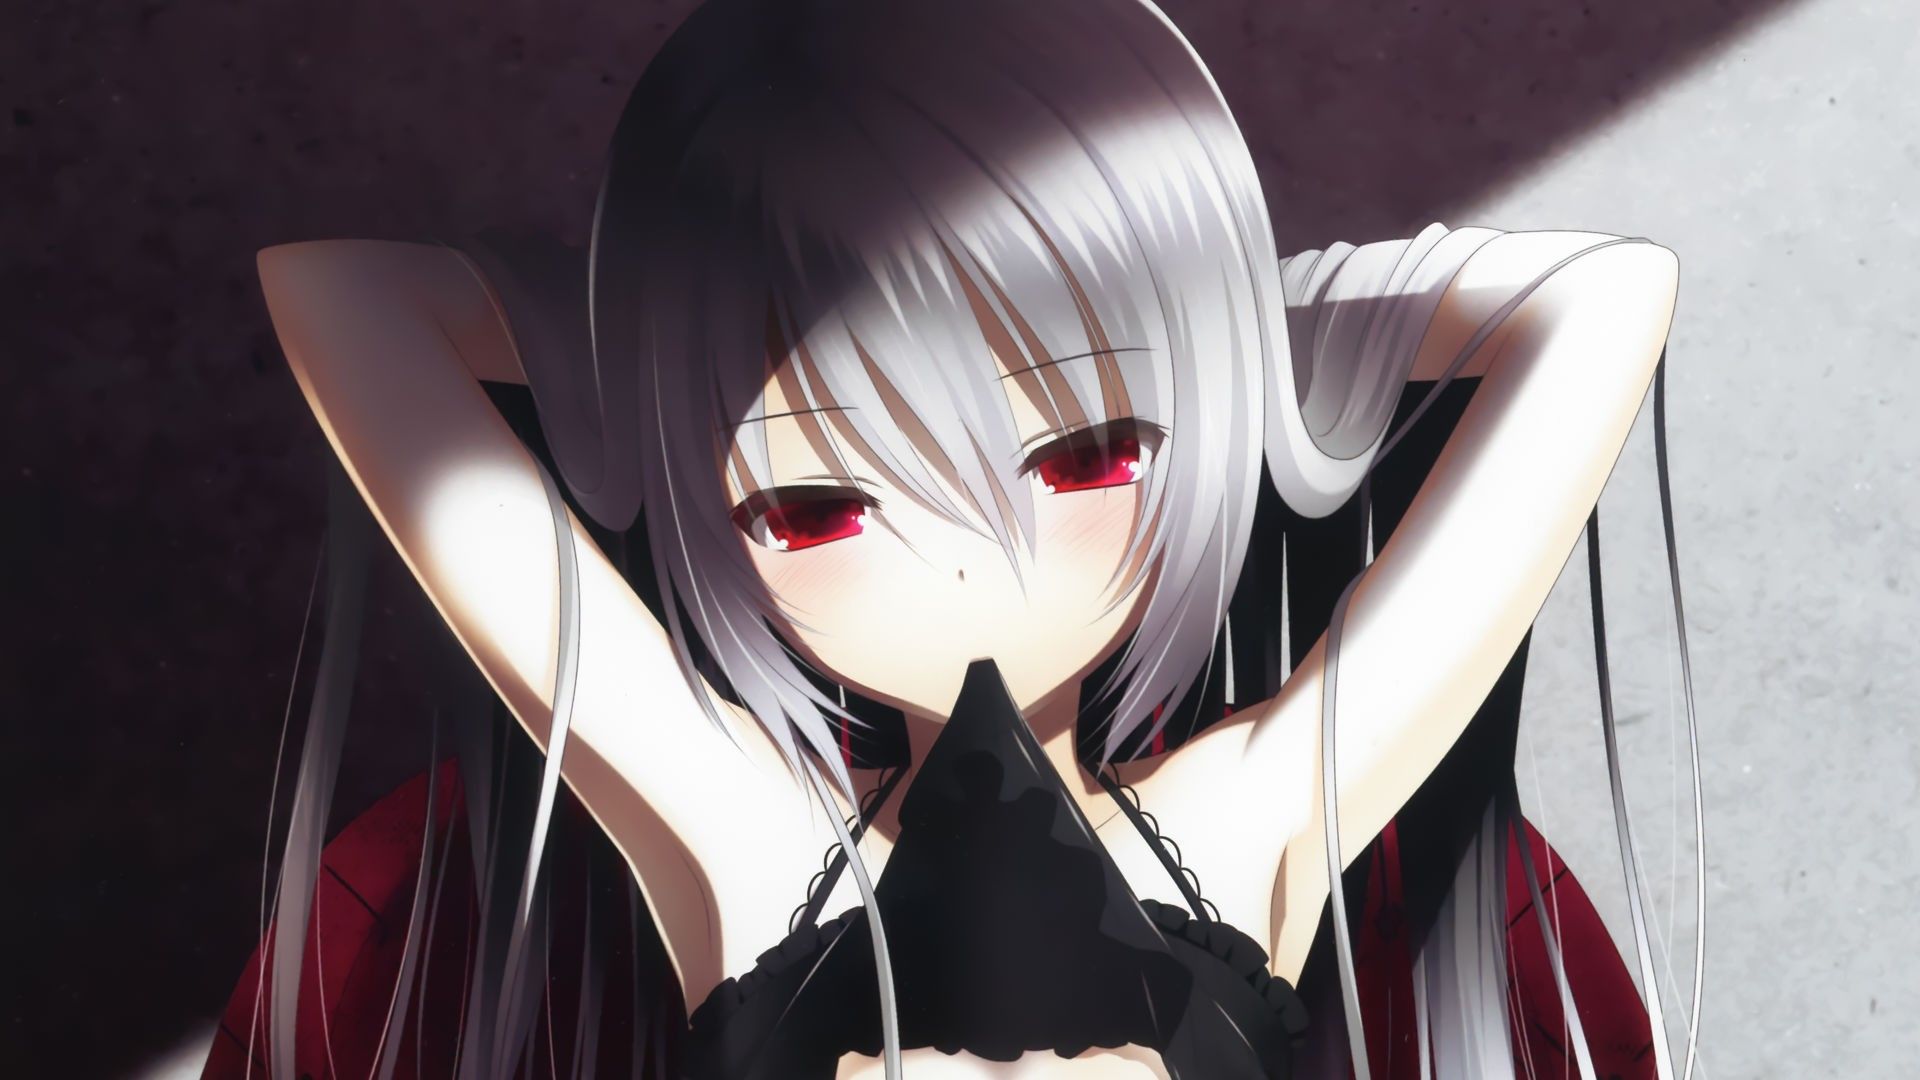 Cute Anime Red Eyed Girls Wallpapers Wallpaper Cave